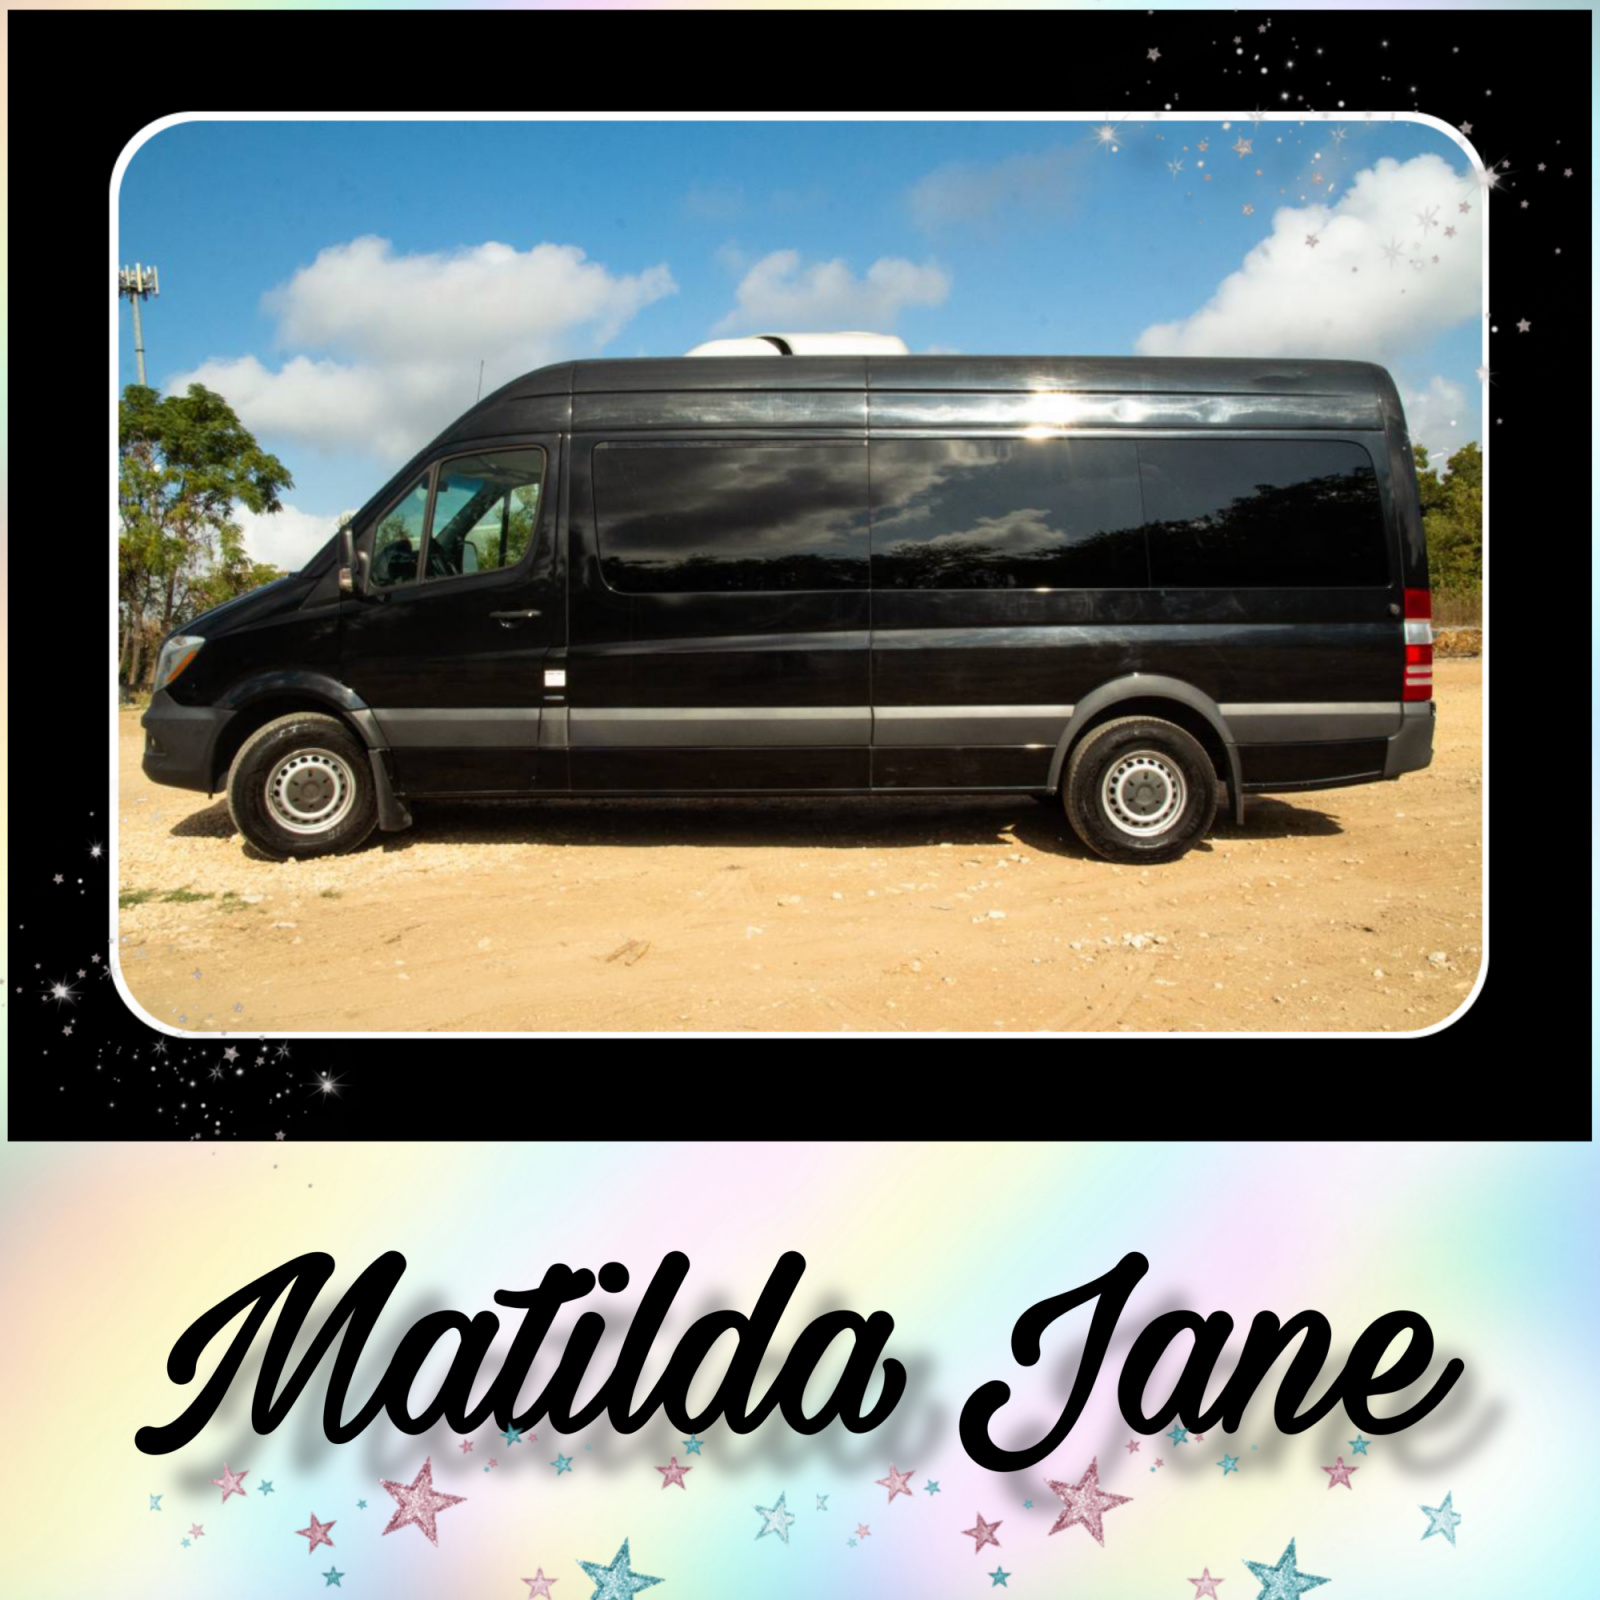 Our beautiful Matilda Jane (Mercedes Sprinter) before she was injured in the wreck.